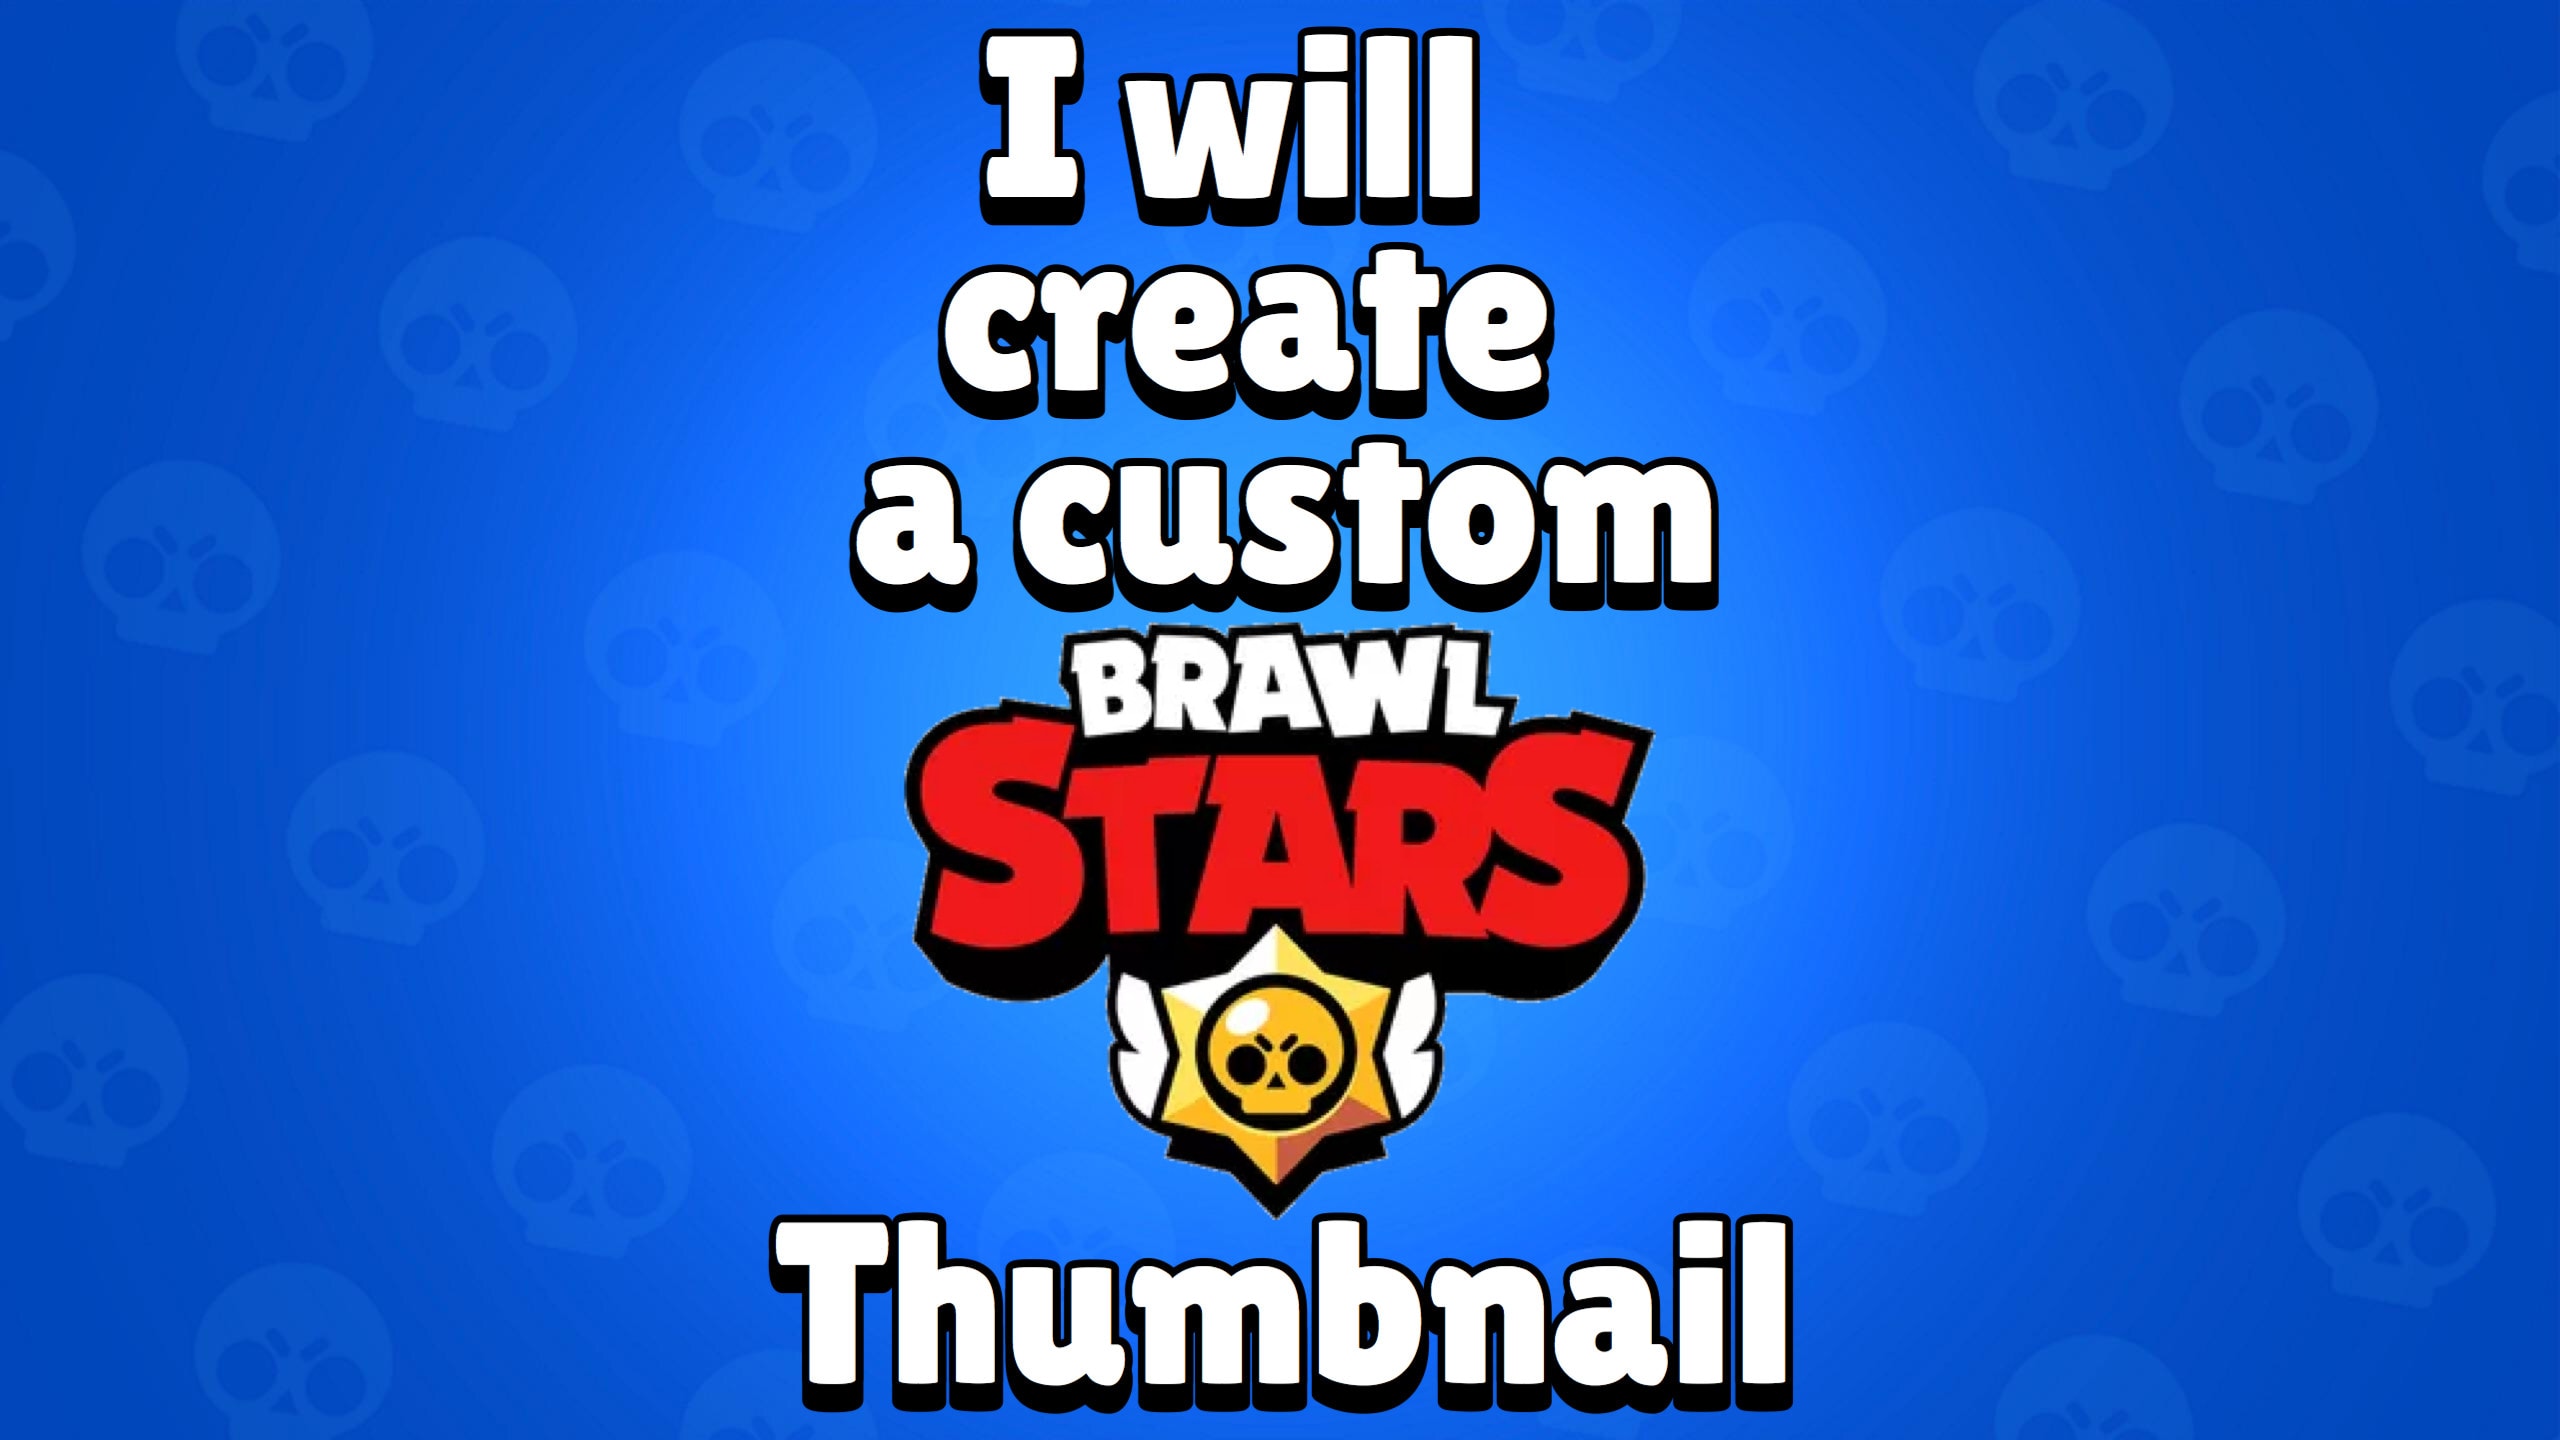 Create A Brawl Stars Thumbnail For Your Yt Video By Jo7186 Fiverr - brawl stars investor video